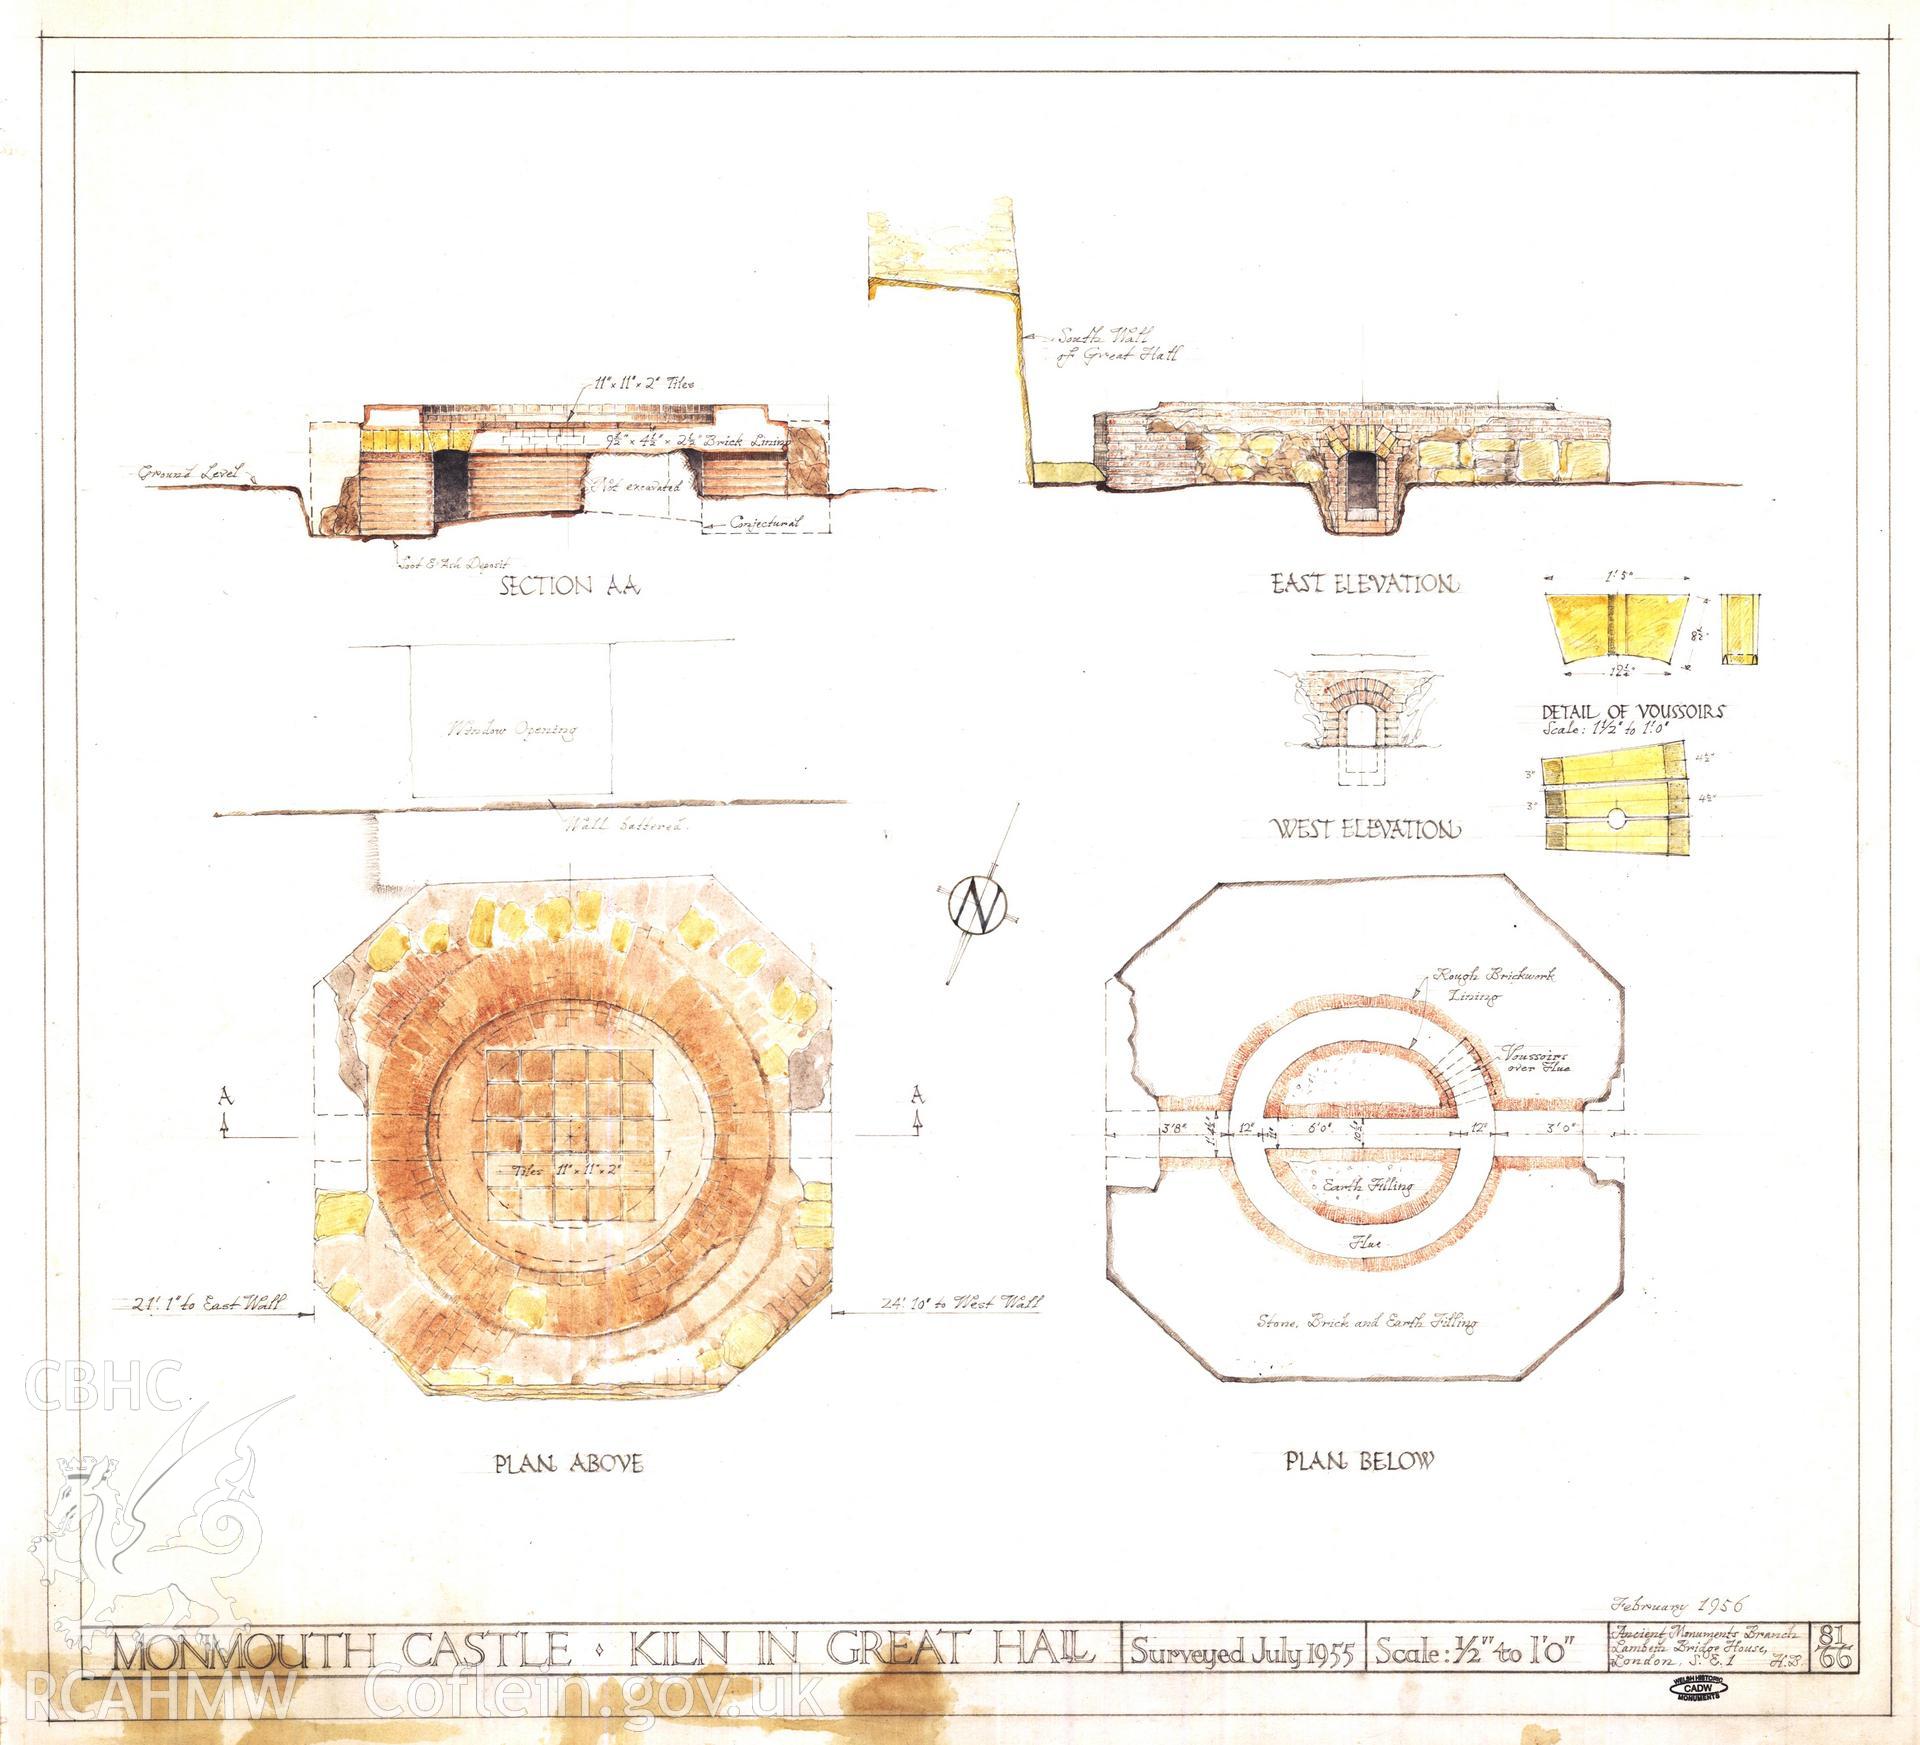 Cadw guardianship monument drawing of Monmouth Great Castle House. Kiln in great hall, plan, section, detail. Cadw Ref. No:81/66. Scale 1:24.